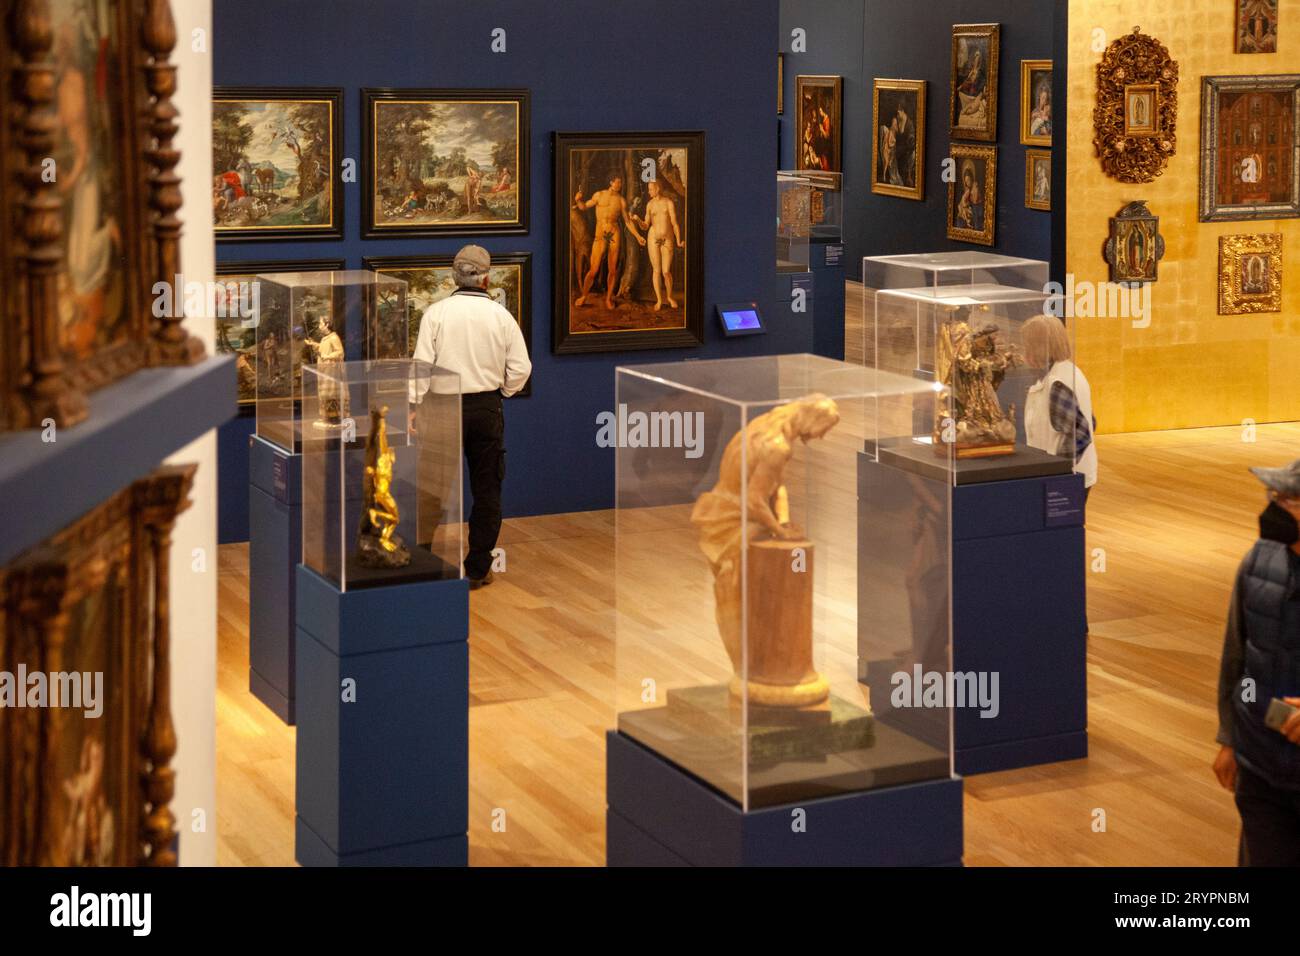 Gallery Room with Religious Works at Museo Soumaya in Mexcio City, Mexico Stock Photo